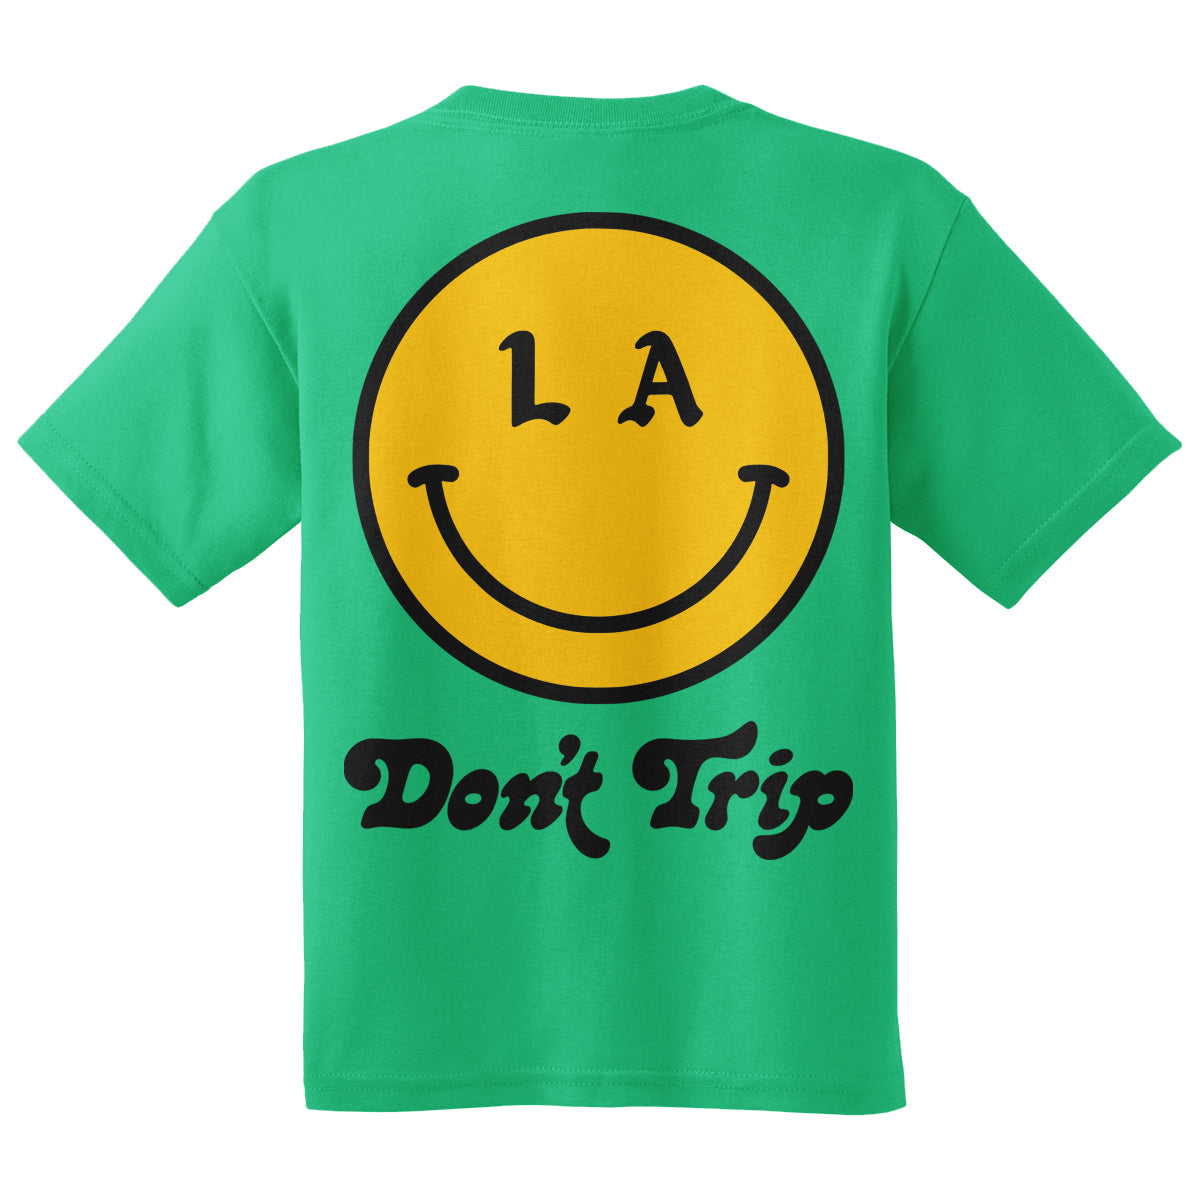 Free & Easy | Be Happy Kids SS Tee in Green